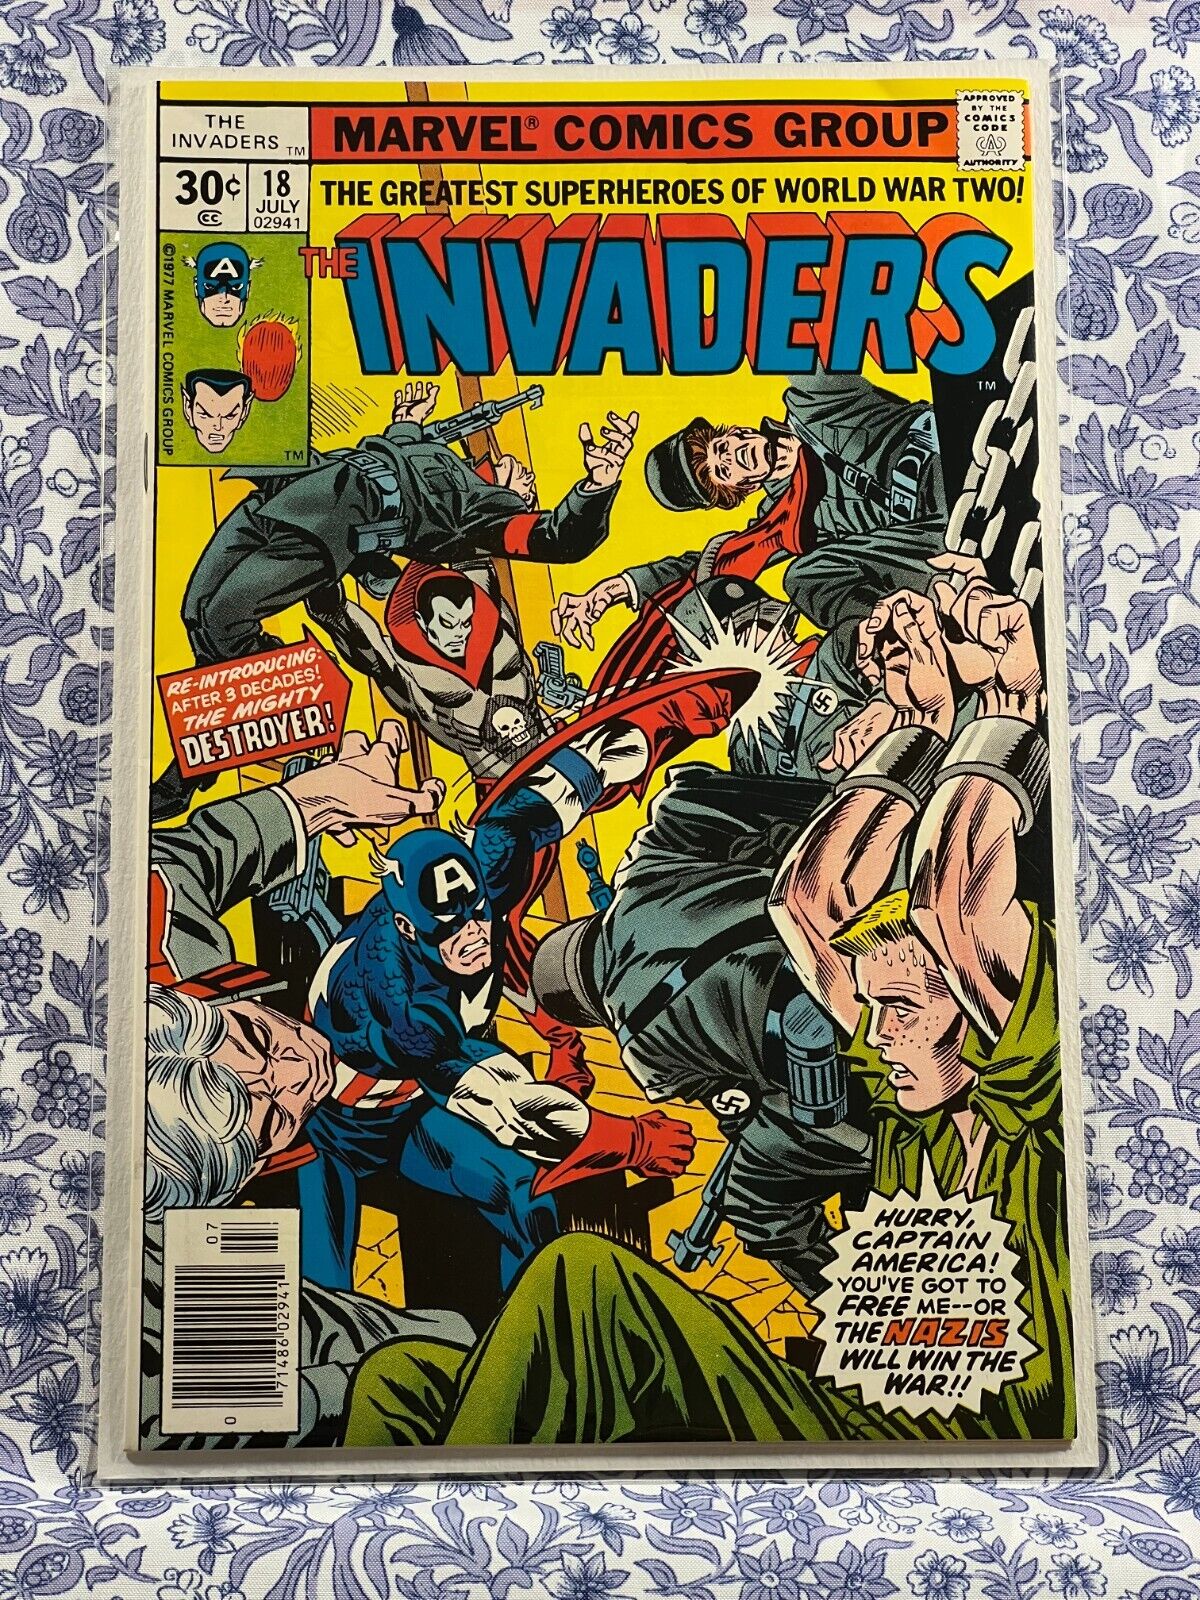 INVADERS #18 NM+ Gil Kane Cover Roy Thomas Warrior Woman Destroyer RARE CGC IT